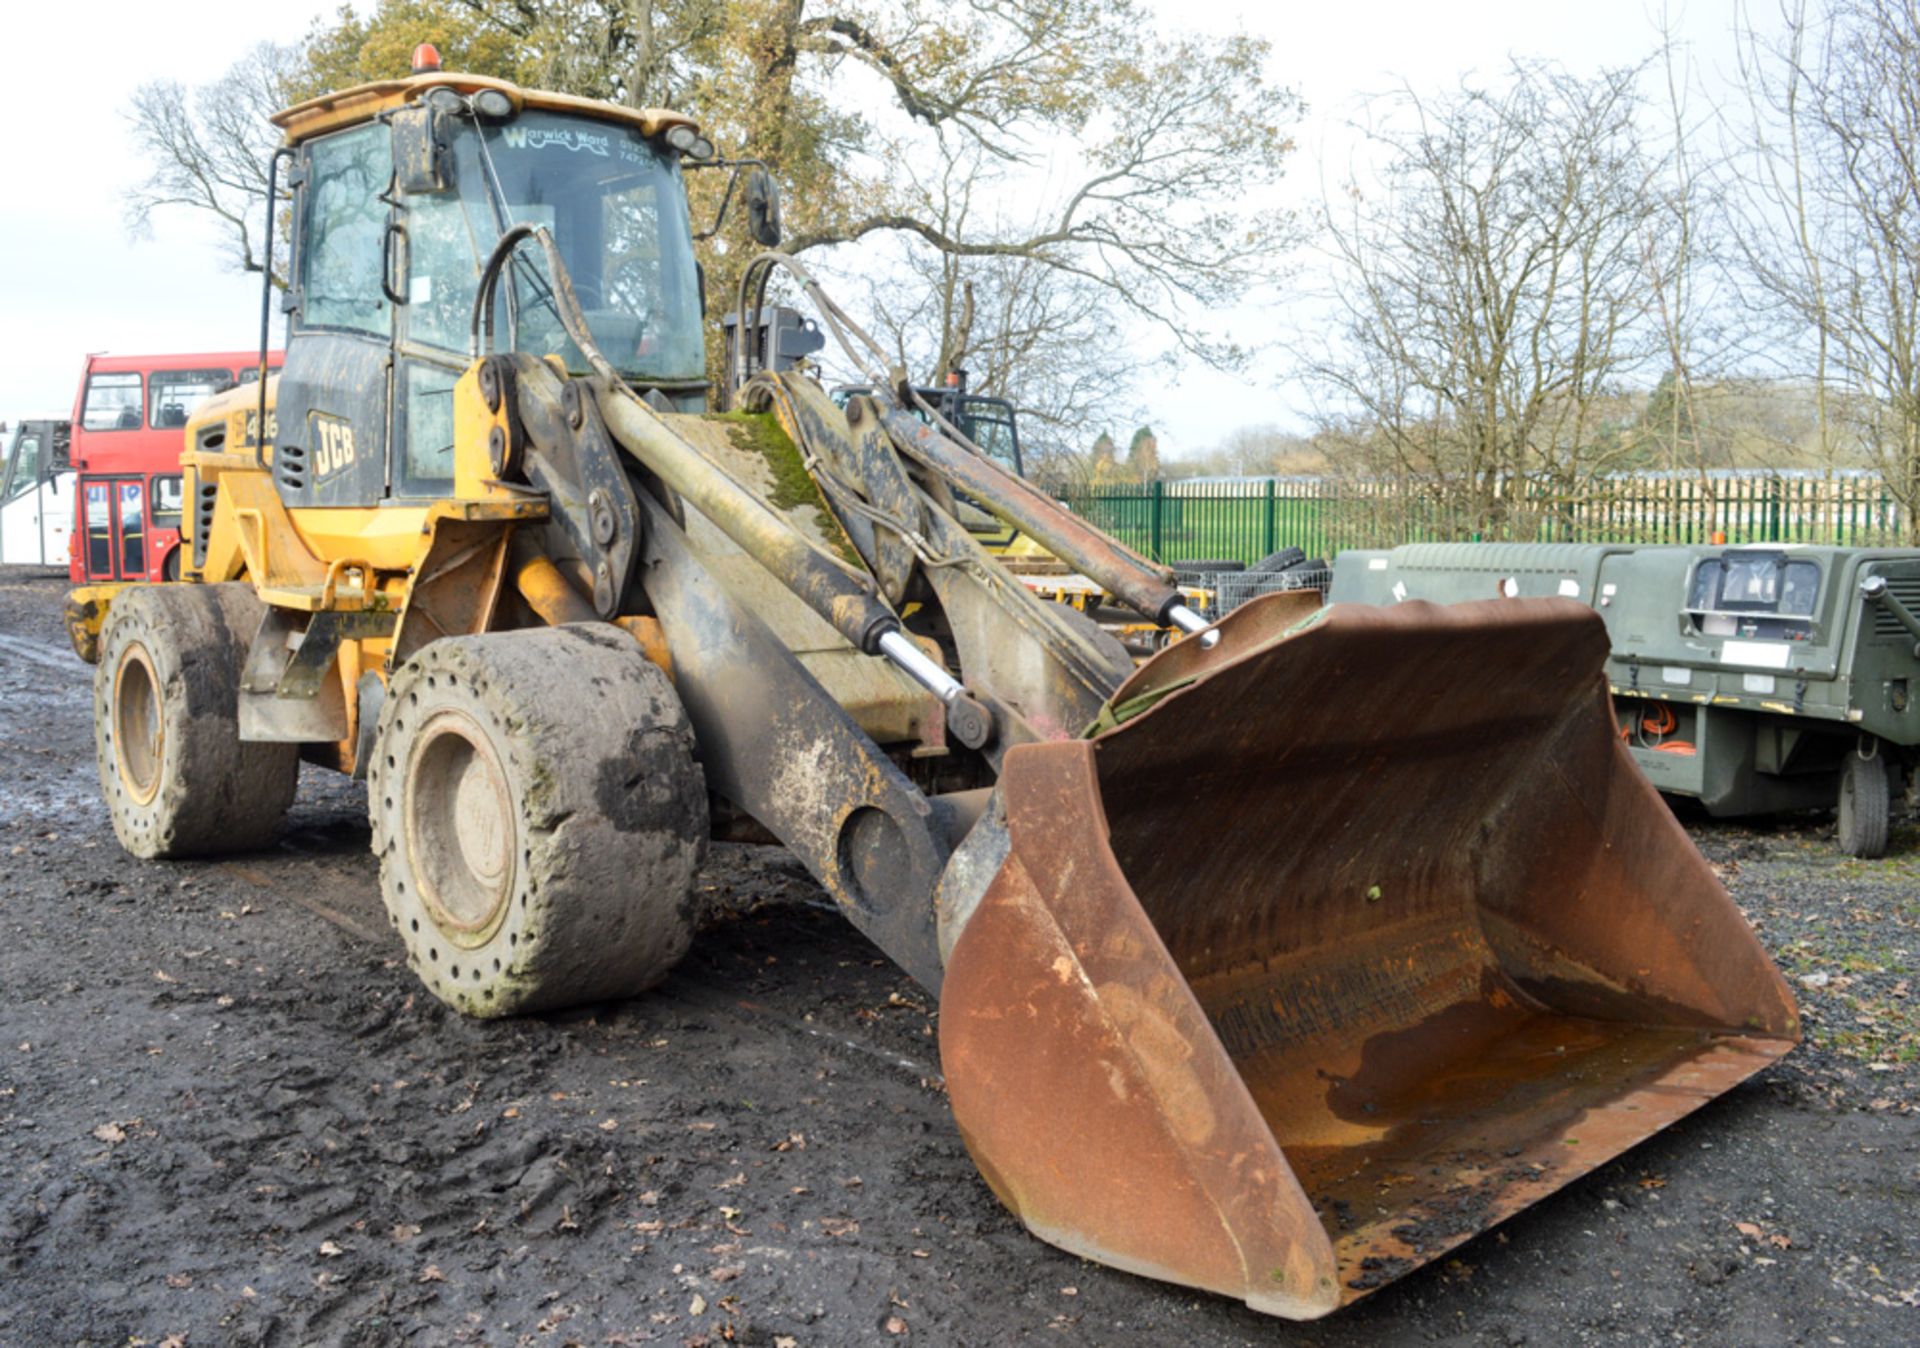 JCB 436E HT loading shovel Year: 2007 S/N: 1410067 Recorded Hours: 12,212 ** Sold as a non runner - Image 4 of 10